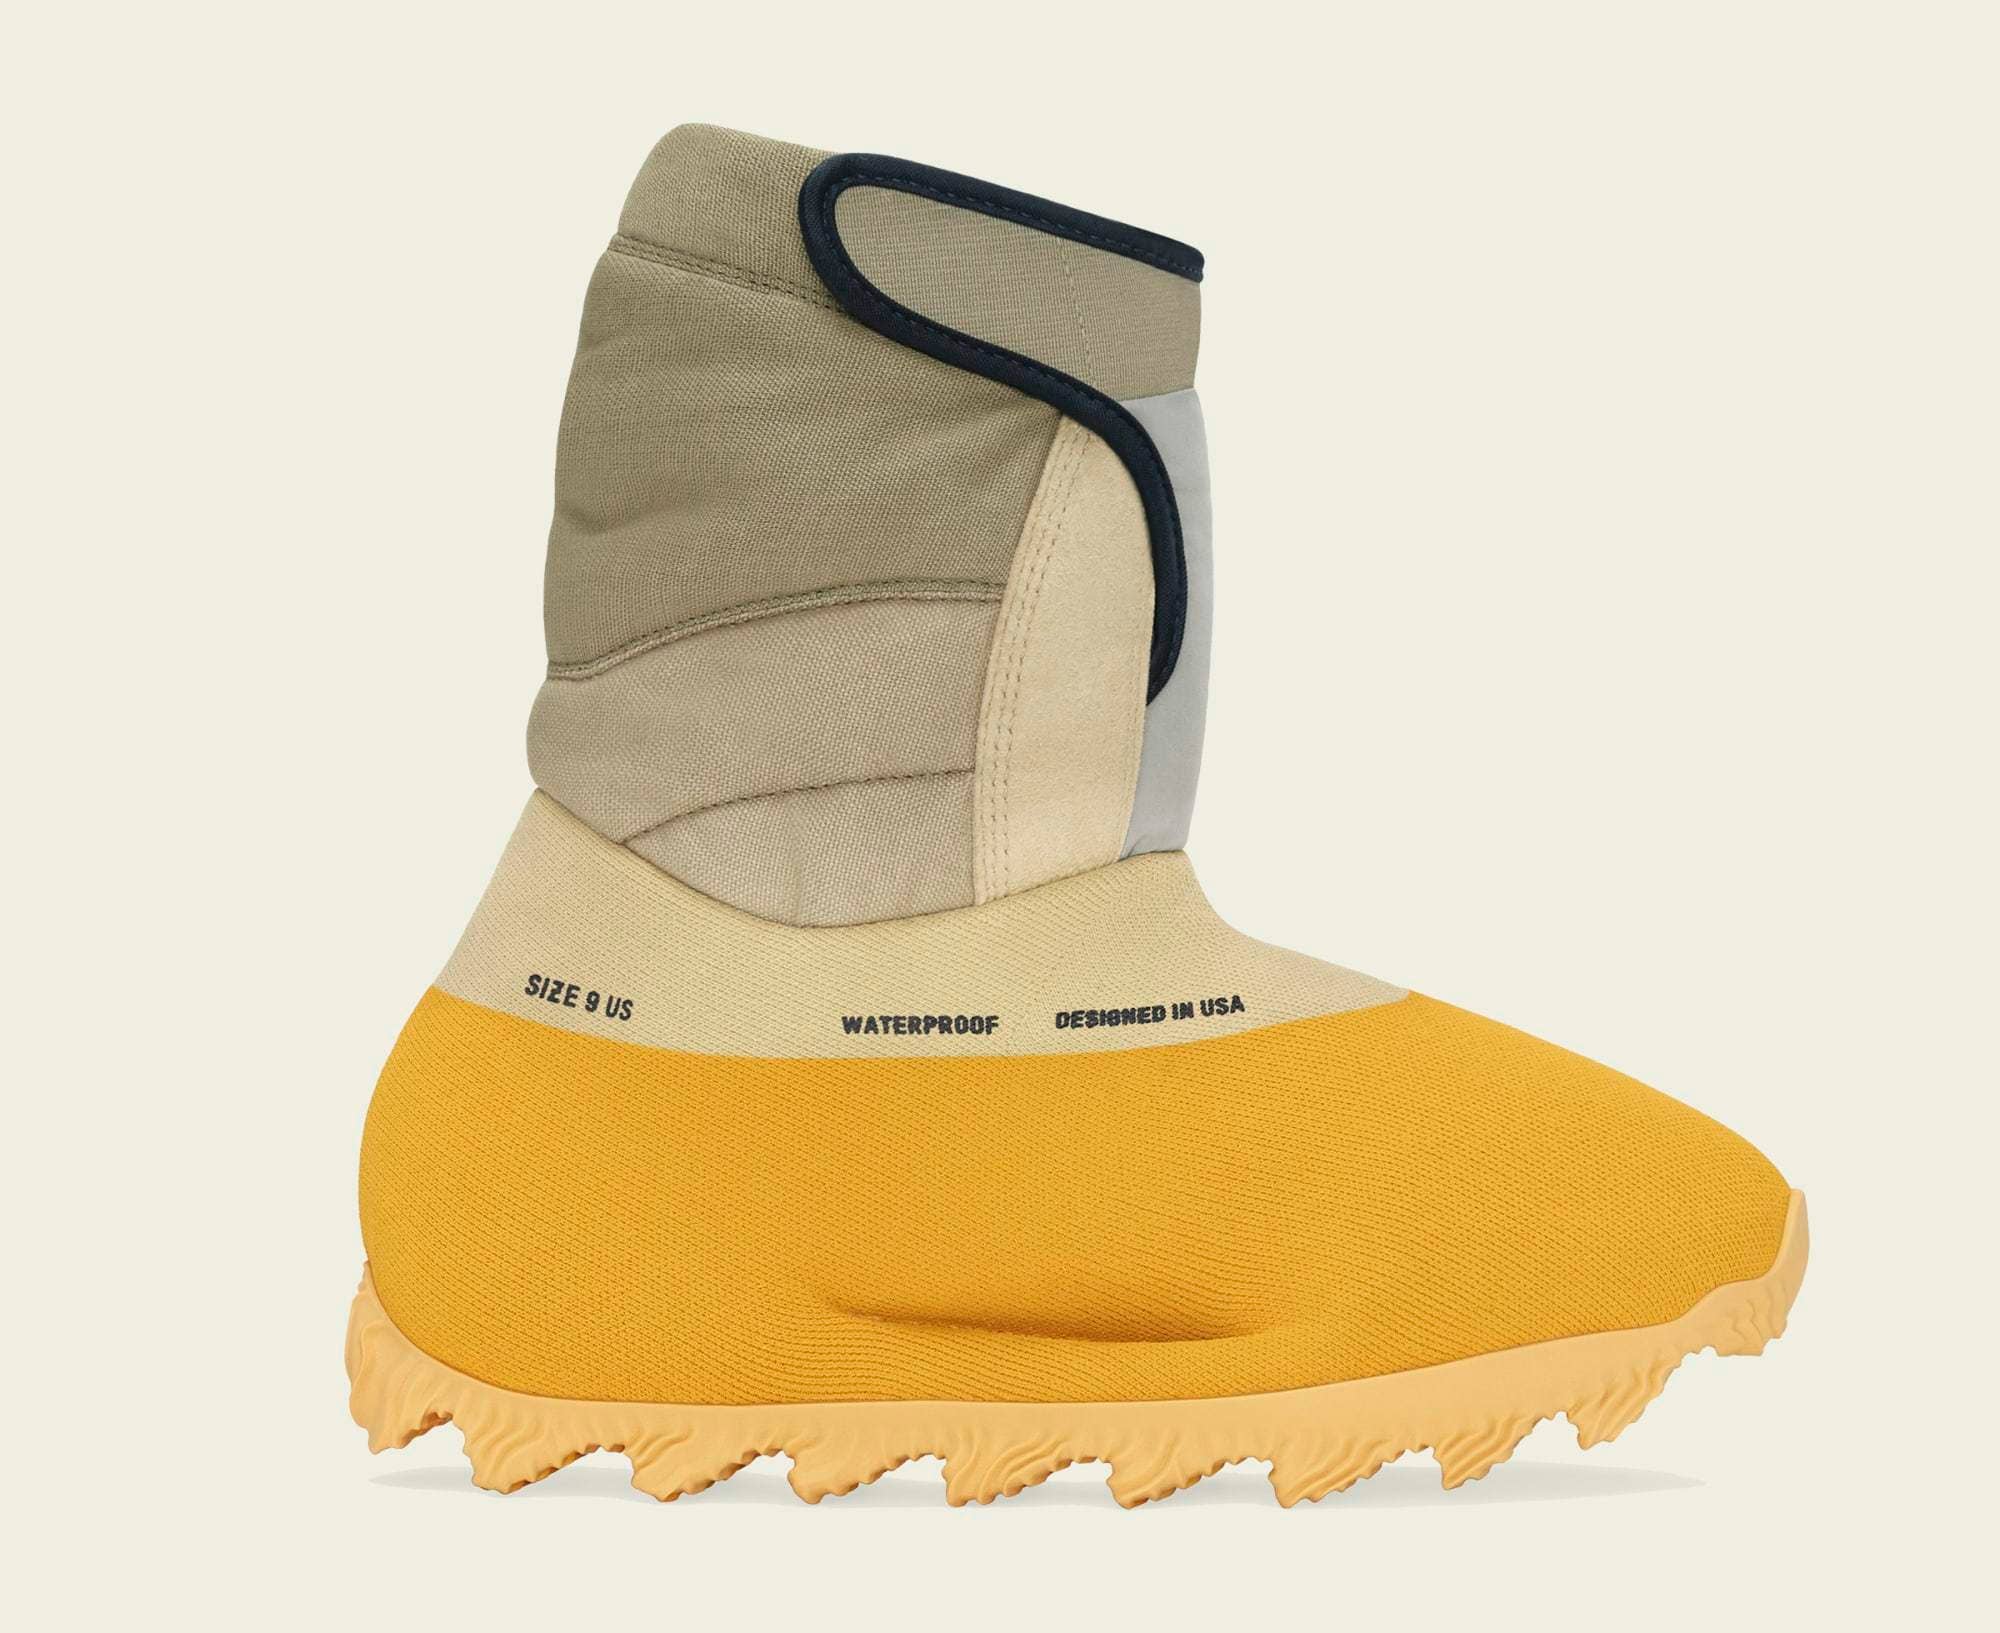 Adidas Yeezy Knit Runner Boot 'Sulfur' GY1824 (Lateral)